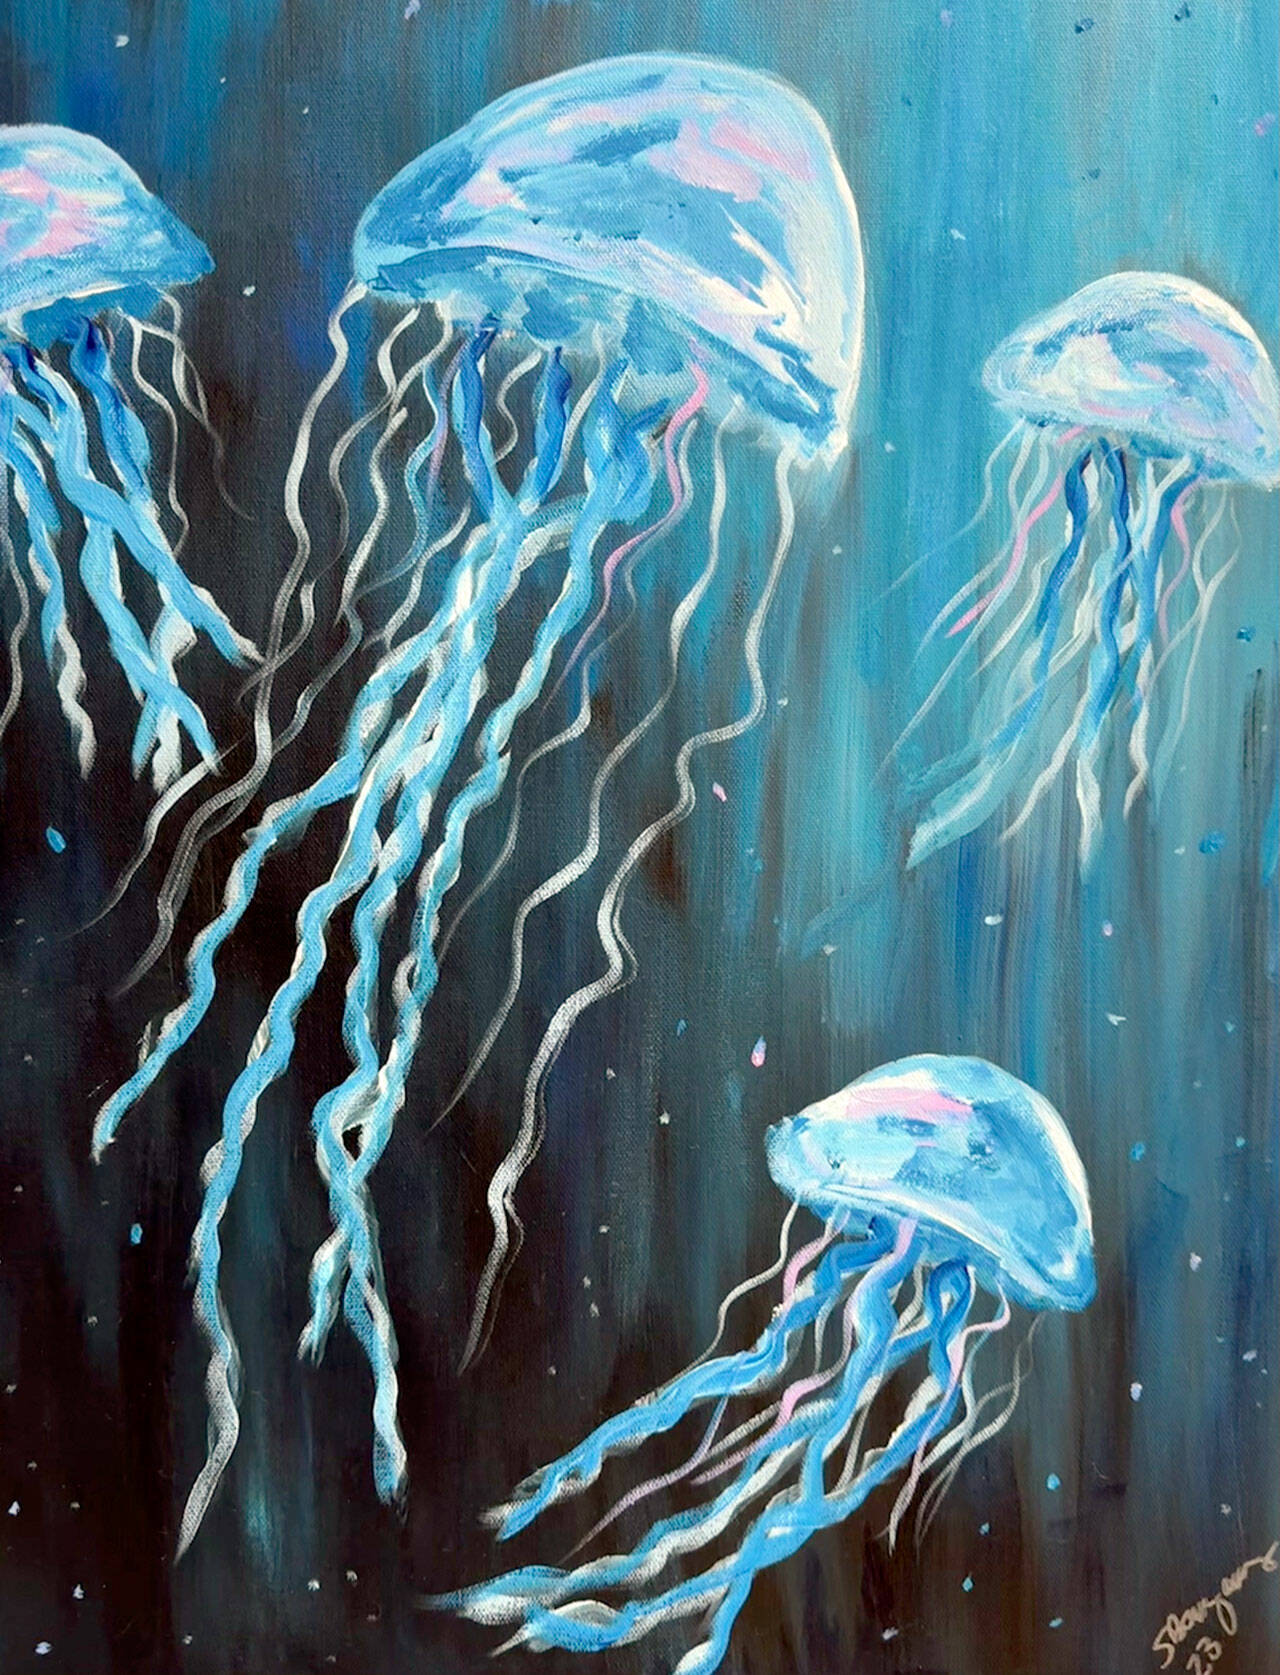 “Jelly Dancing” is among the artwork of the Port Ludlow Art League’s artist of the month Shirley Bomgaars.